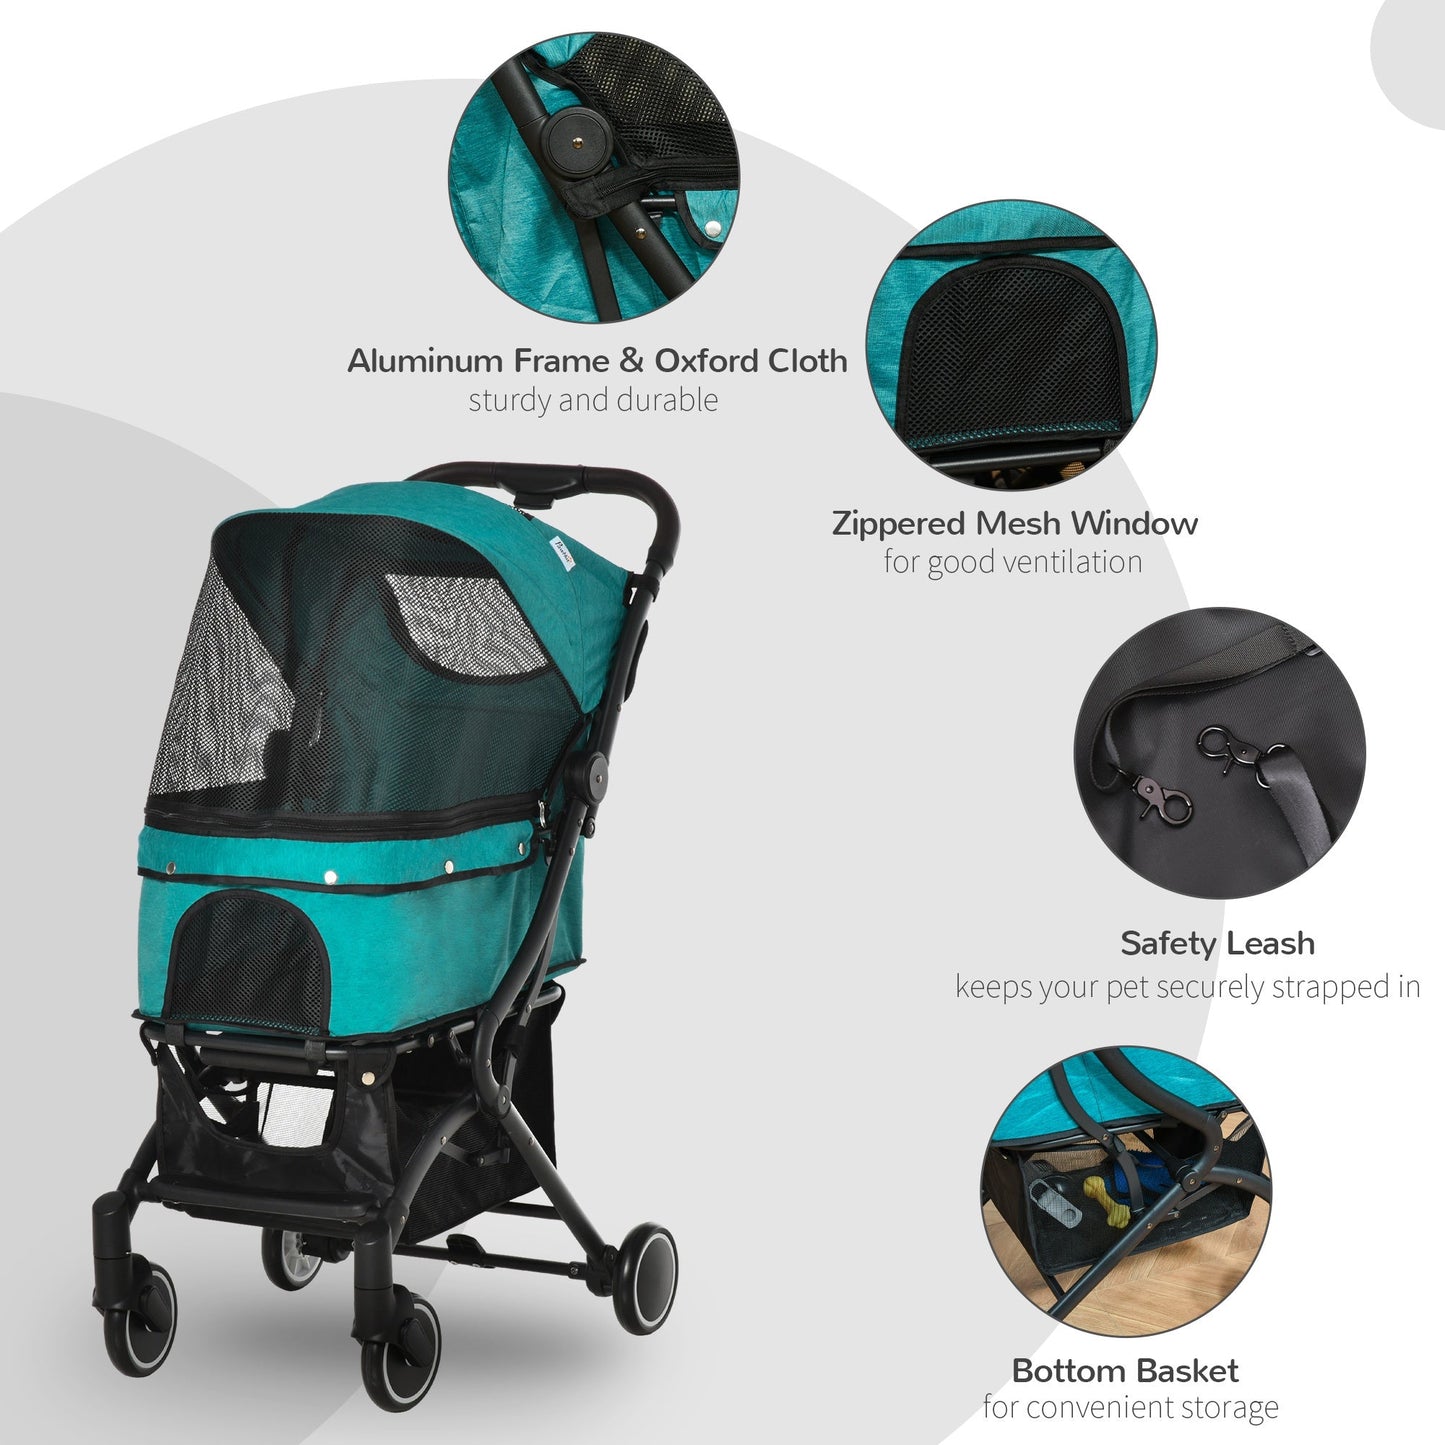 Pet Supplies-Pet Stroller for Dogs, Cats, One-Click Fold Jogger Pushchair with EVA Wheels, Brakes, Basket, Safety Belts, Zippered Mesh Window Door, Blue - Outdoor Style Company